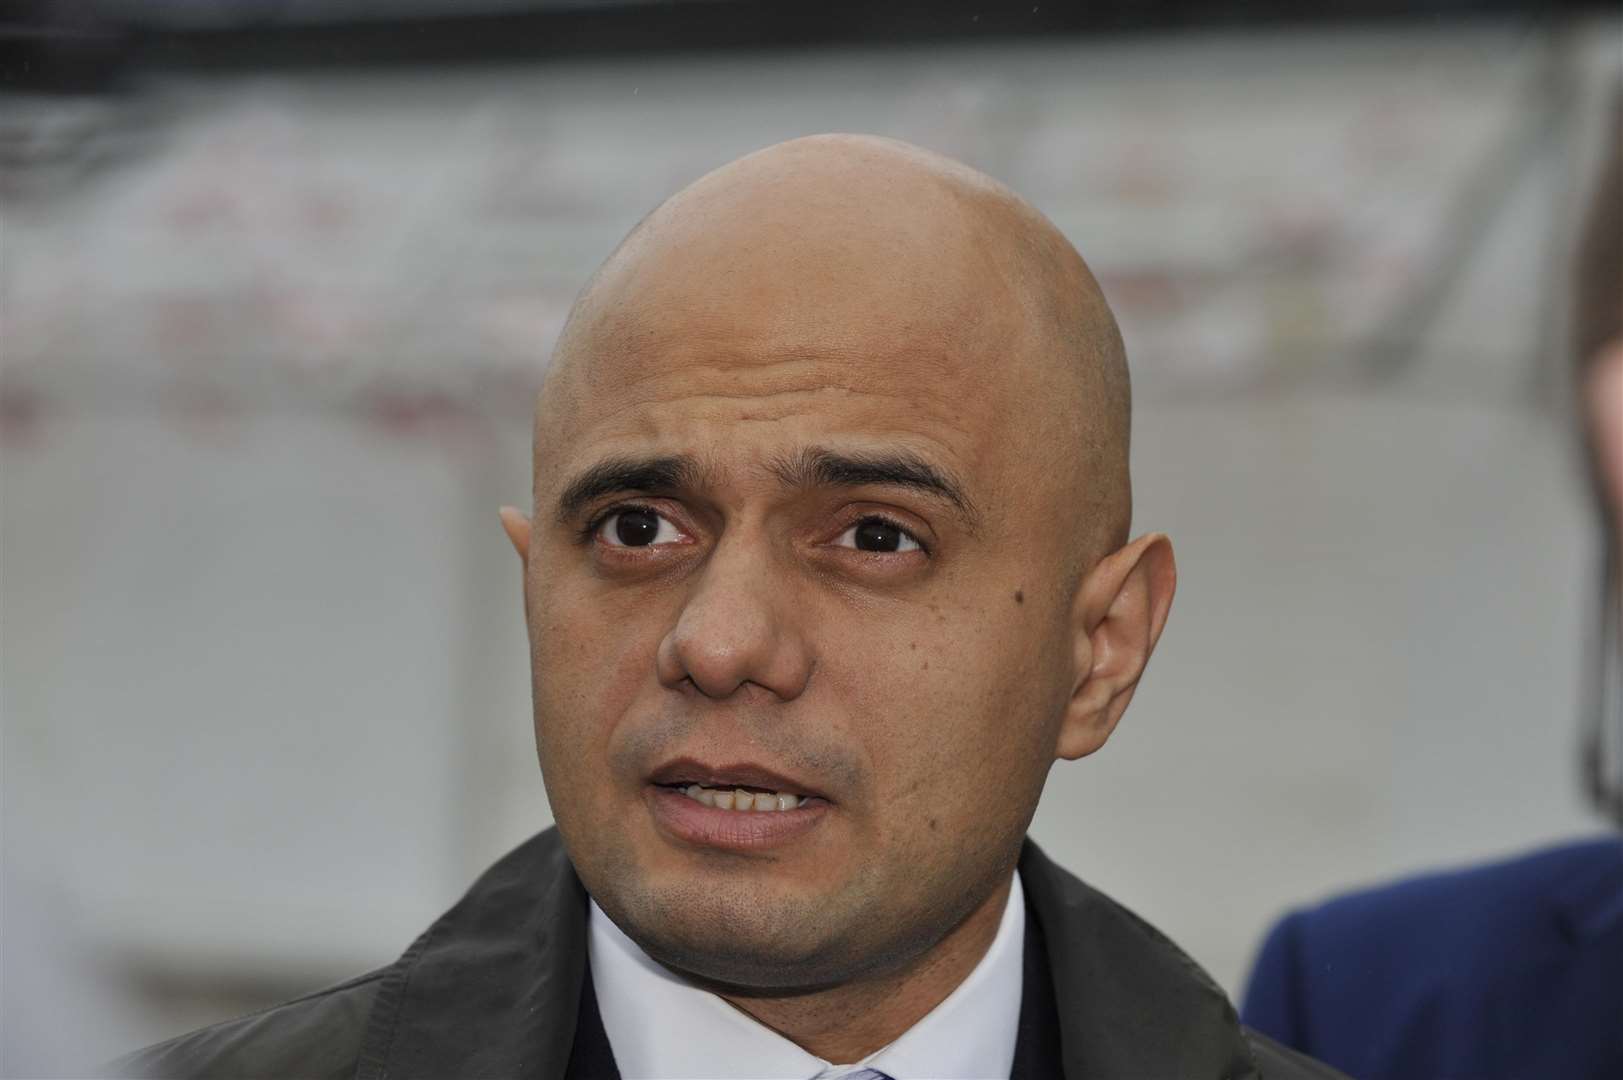 Home secretary Sajid Javid is returning home early from a family holiday to deal with the incidents Picture: Tony Flashman